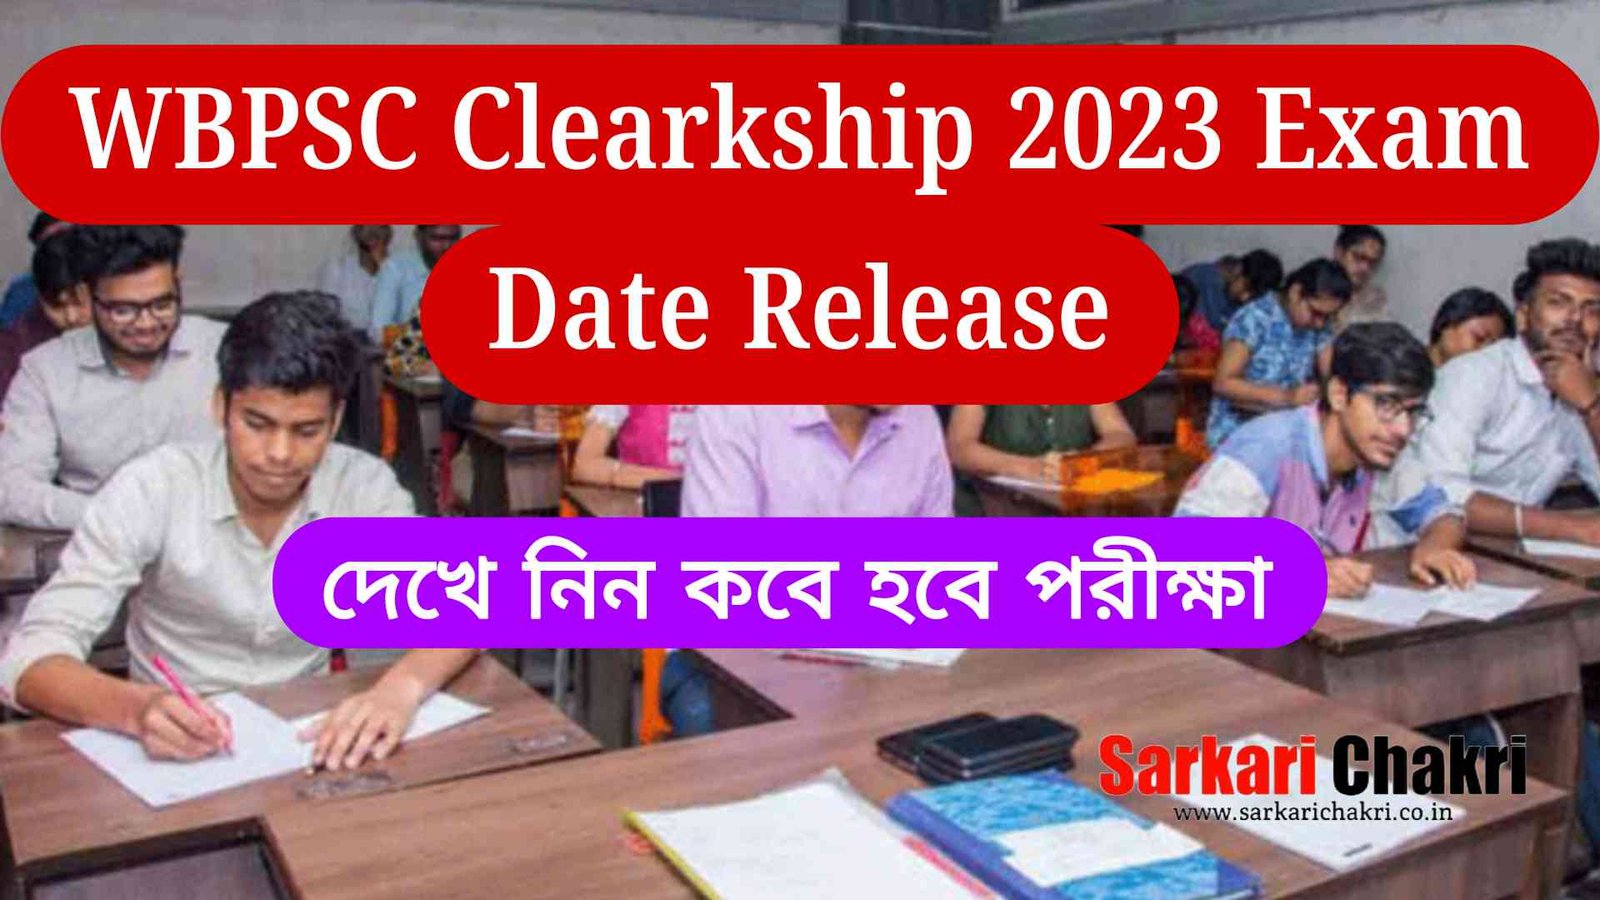 WBPSC Clearkship 2023 Exam Date Release